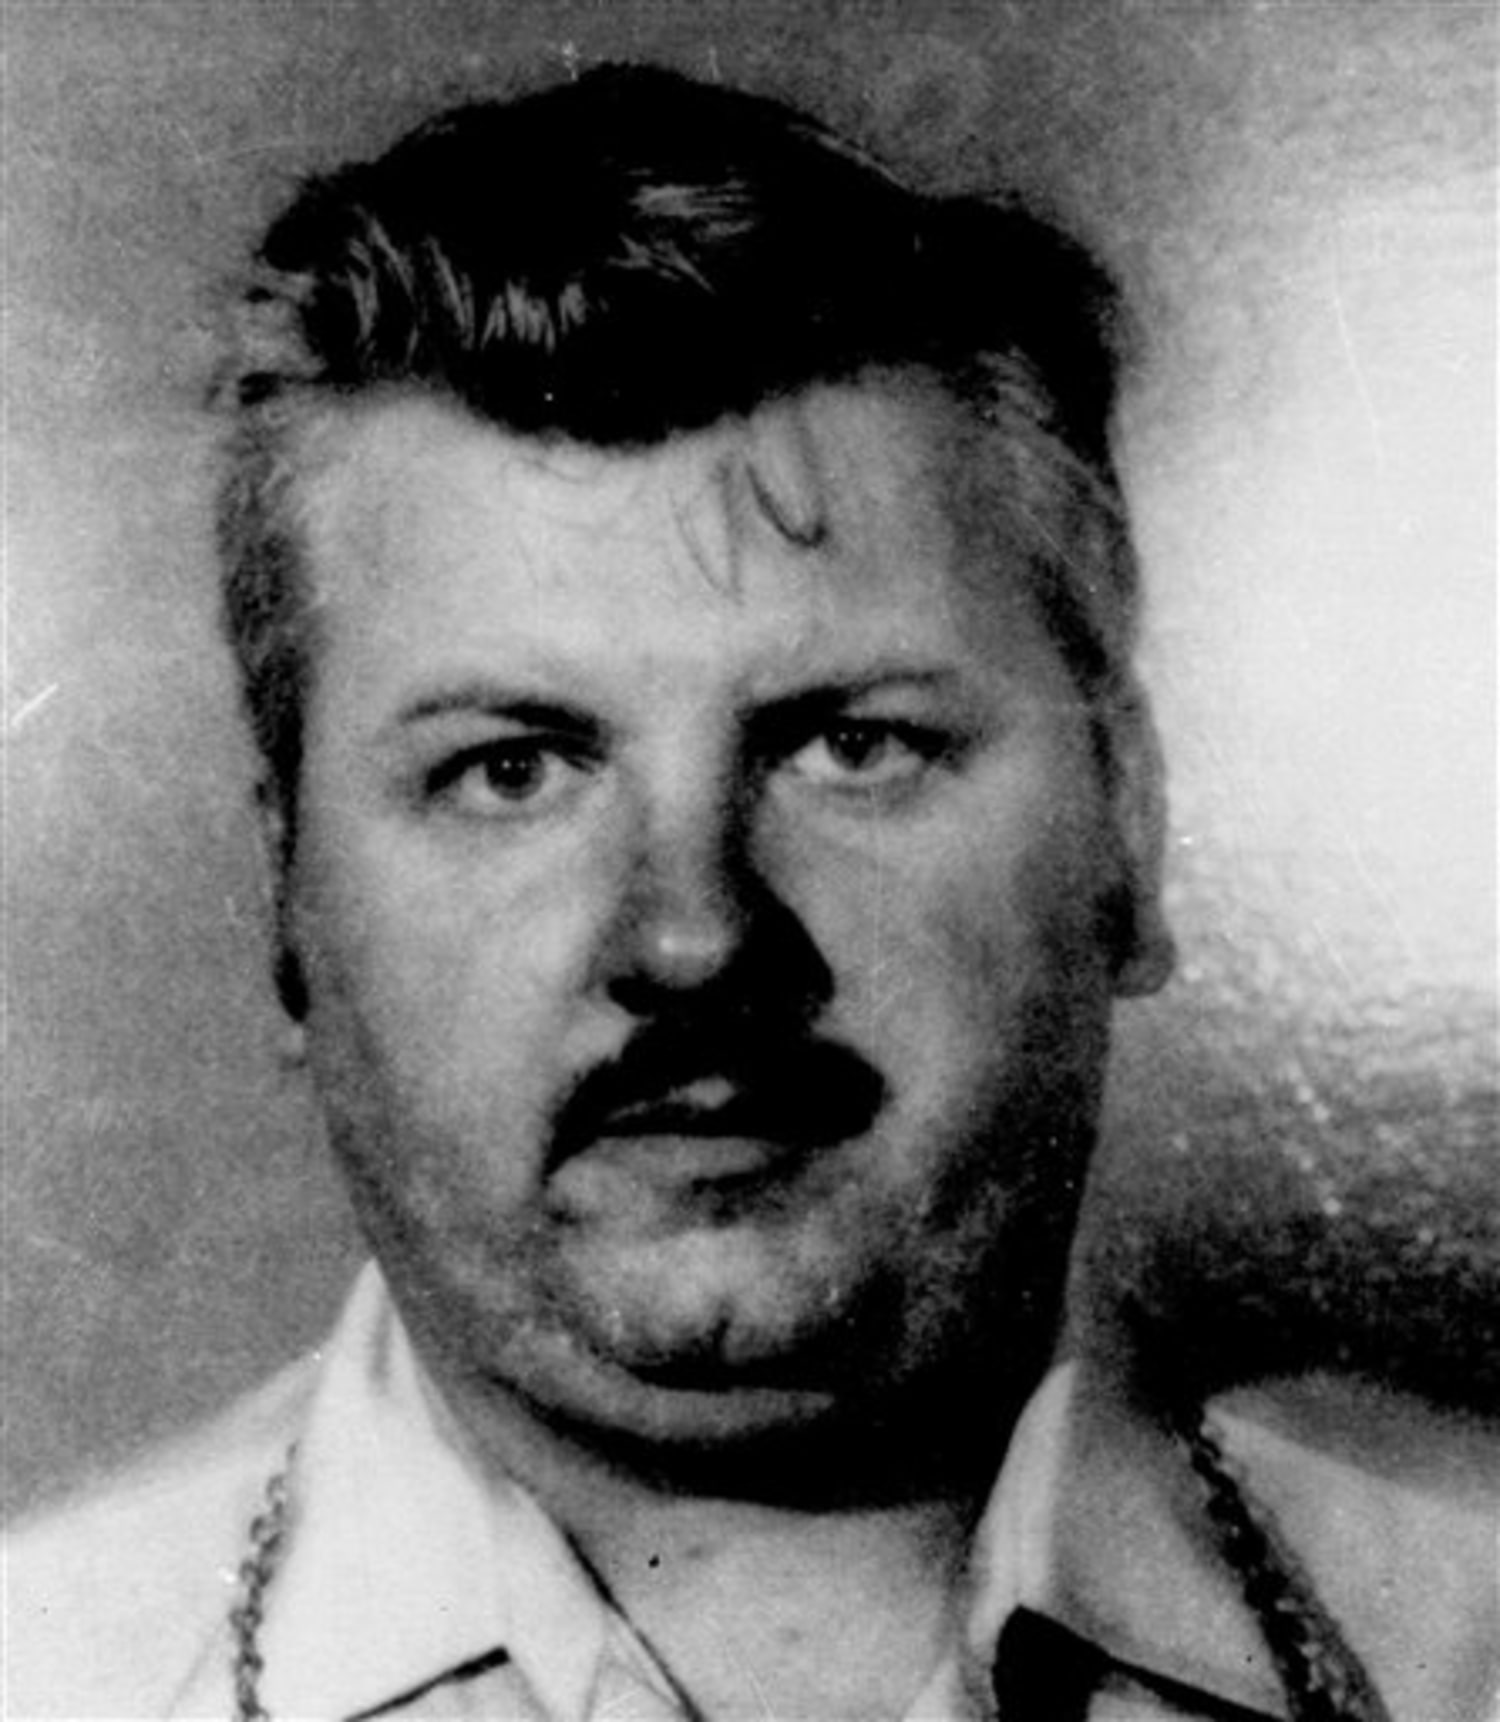 30 years later, remains of Gacy victims exhumed pic